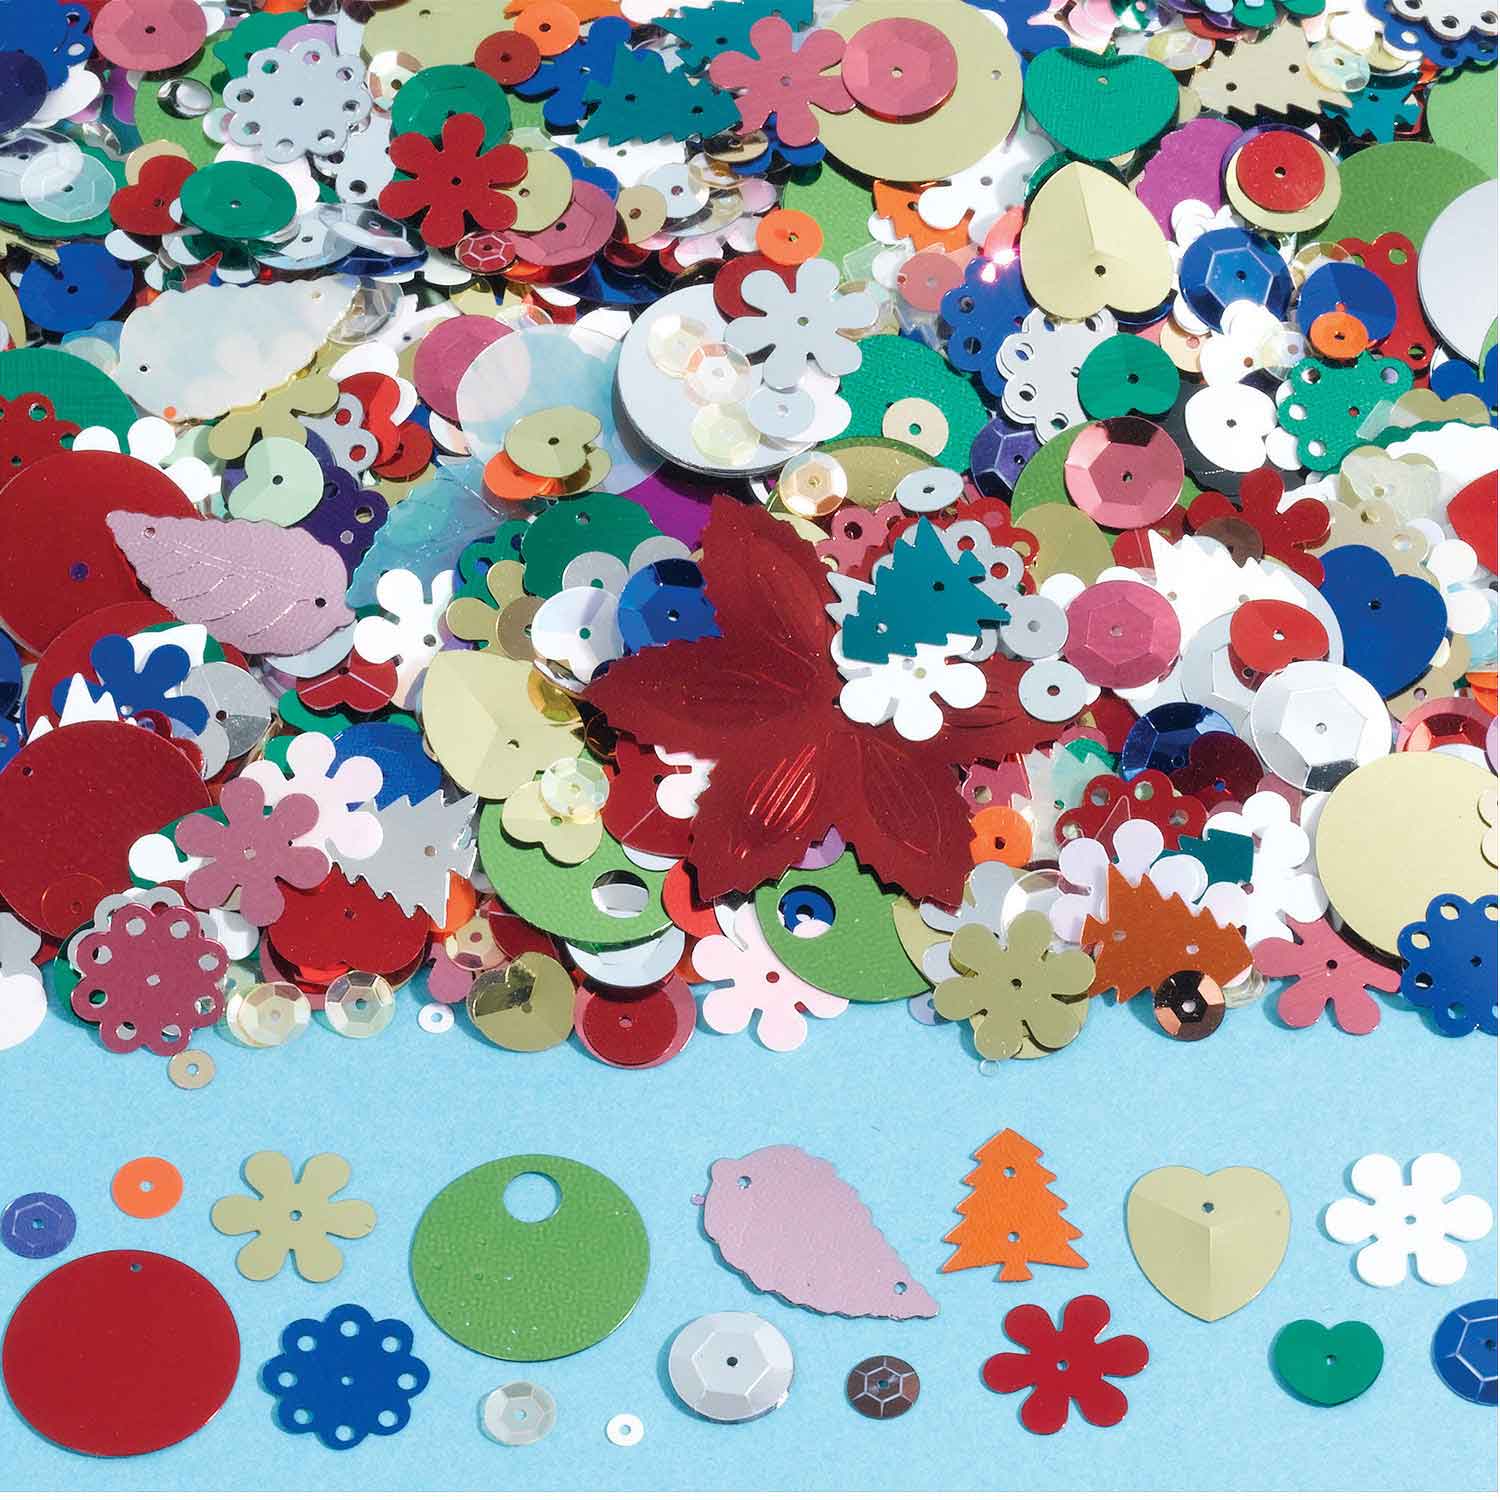 Sequins & Spangles for Arts & Crafts Projects